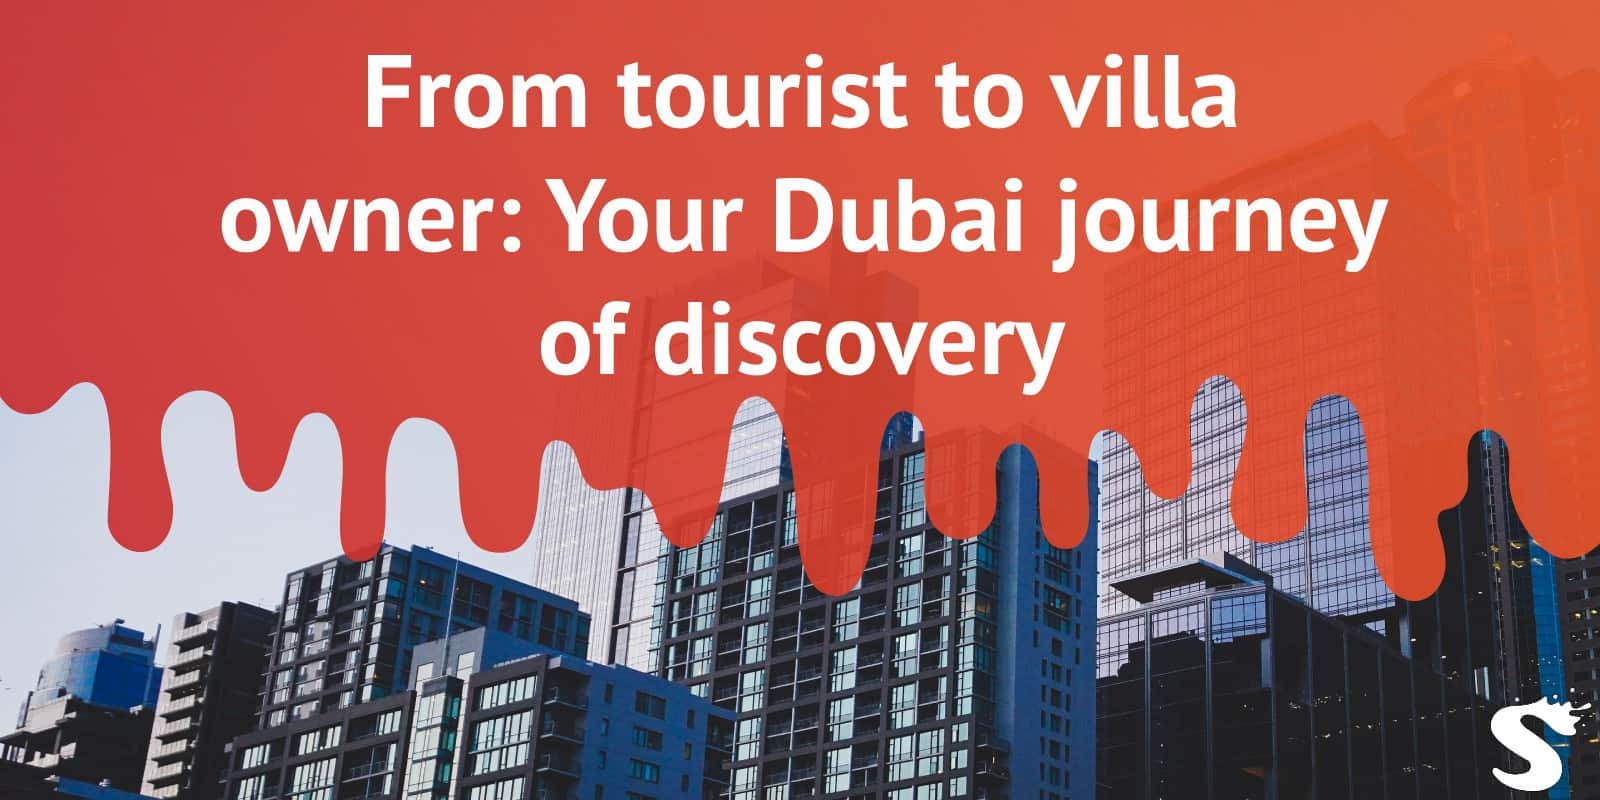 From tourist to villa owner: Your Dubai journey of discovery